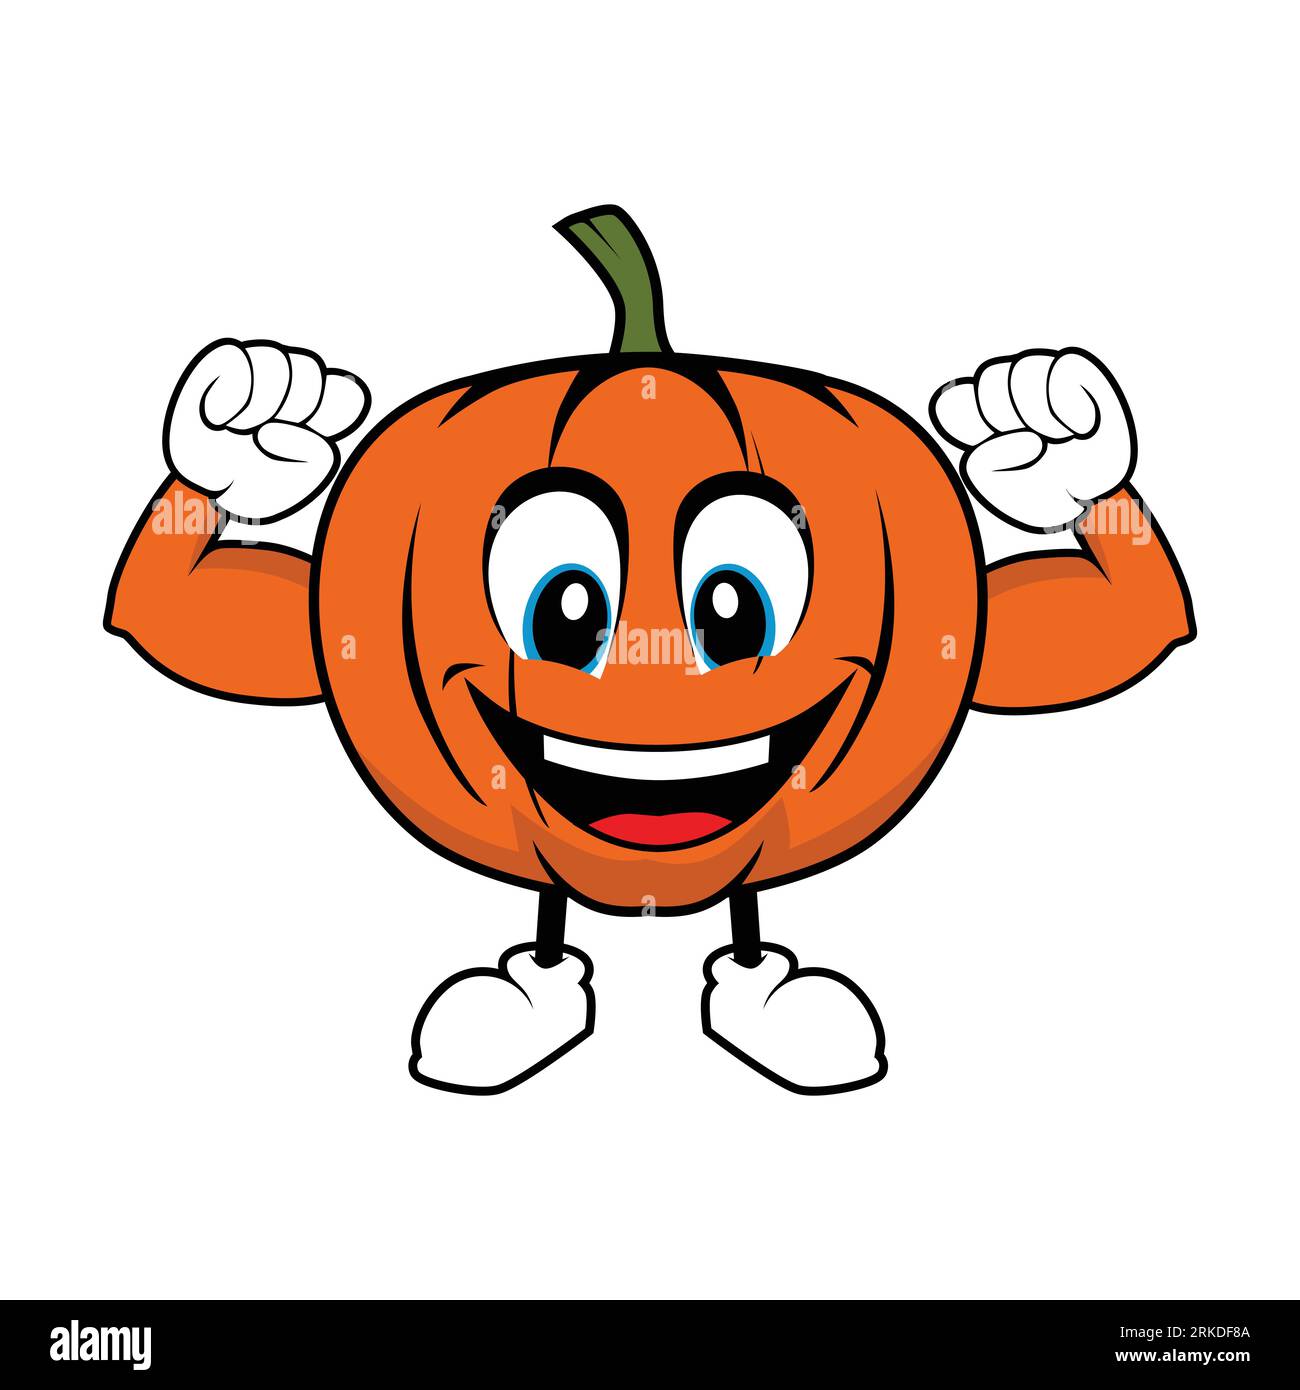 Smilling Pumpkin Mascot with Muscle Arms Stock Vector